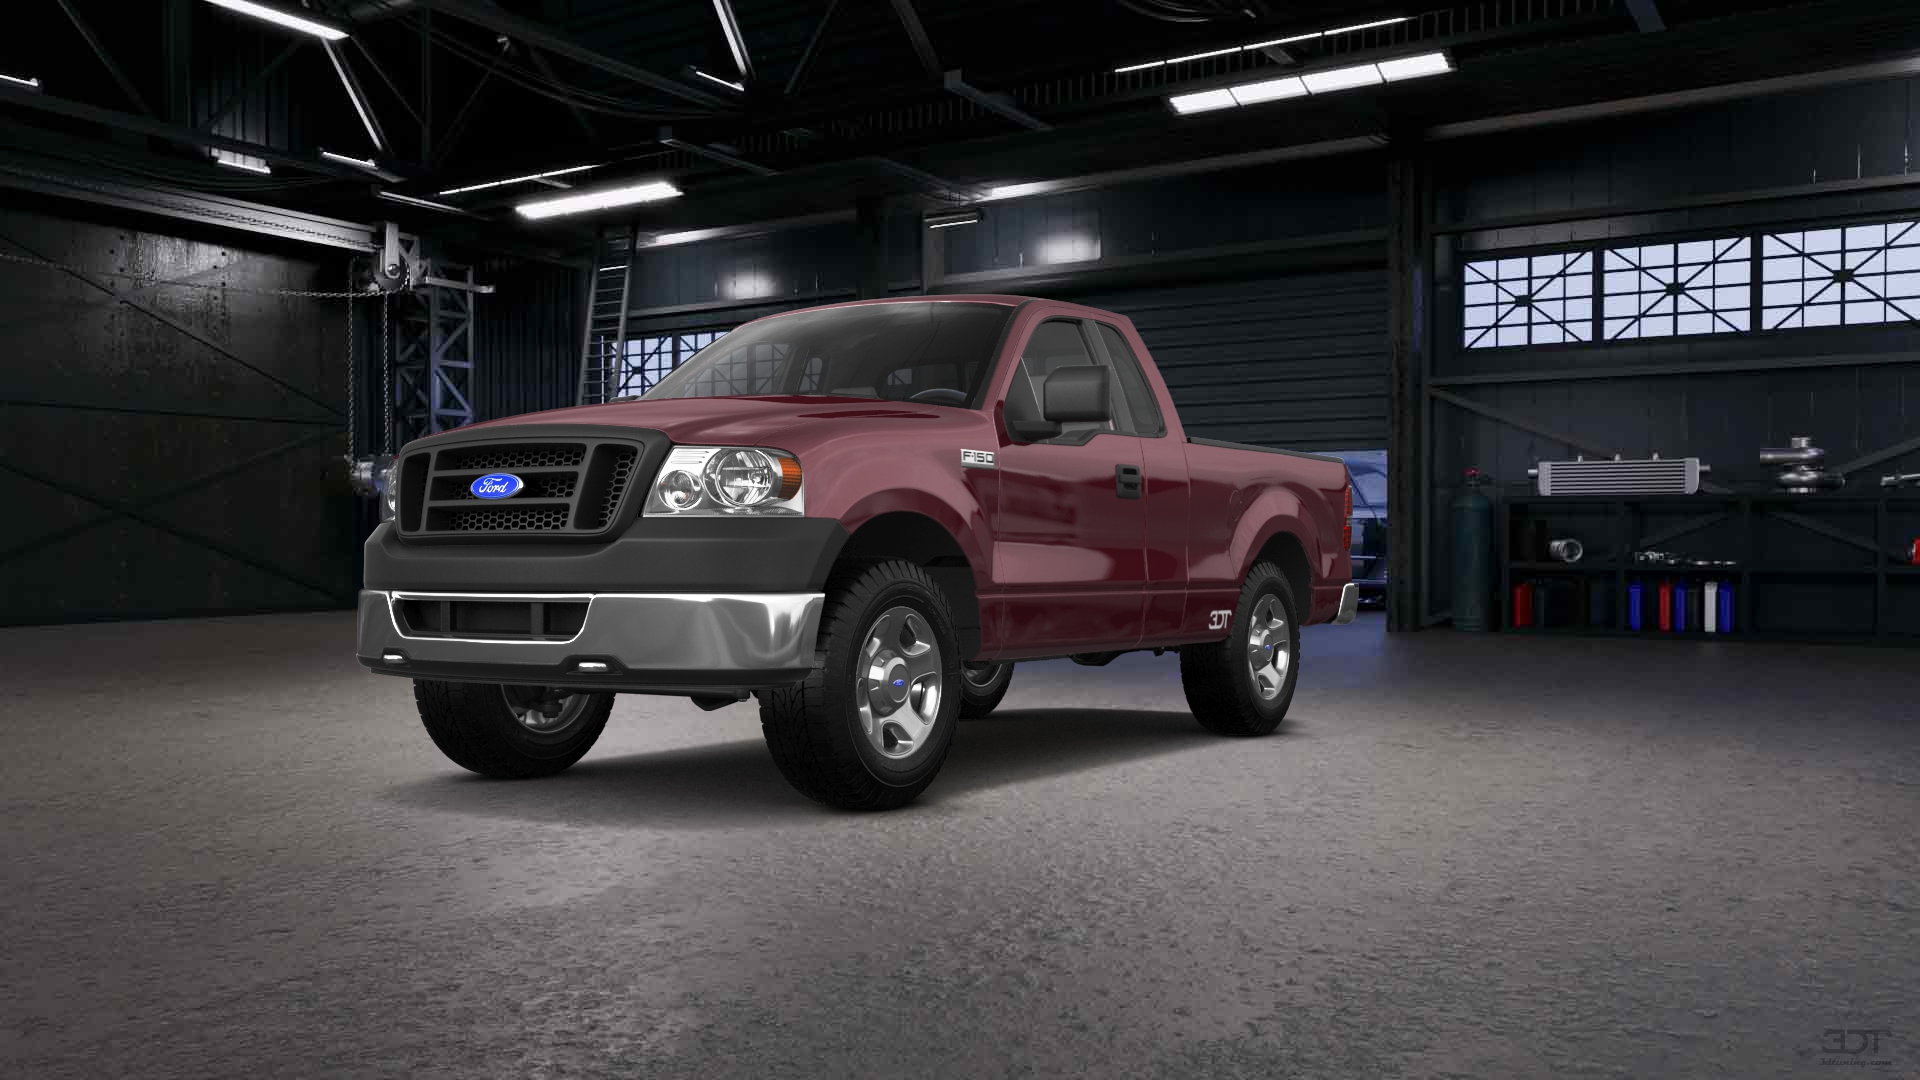 Ford F-150 challenge Pickup Truck 4008